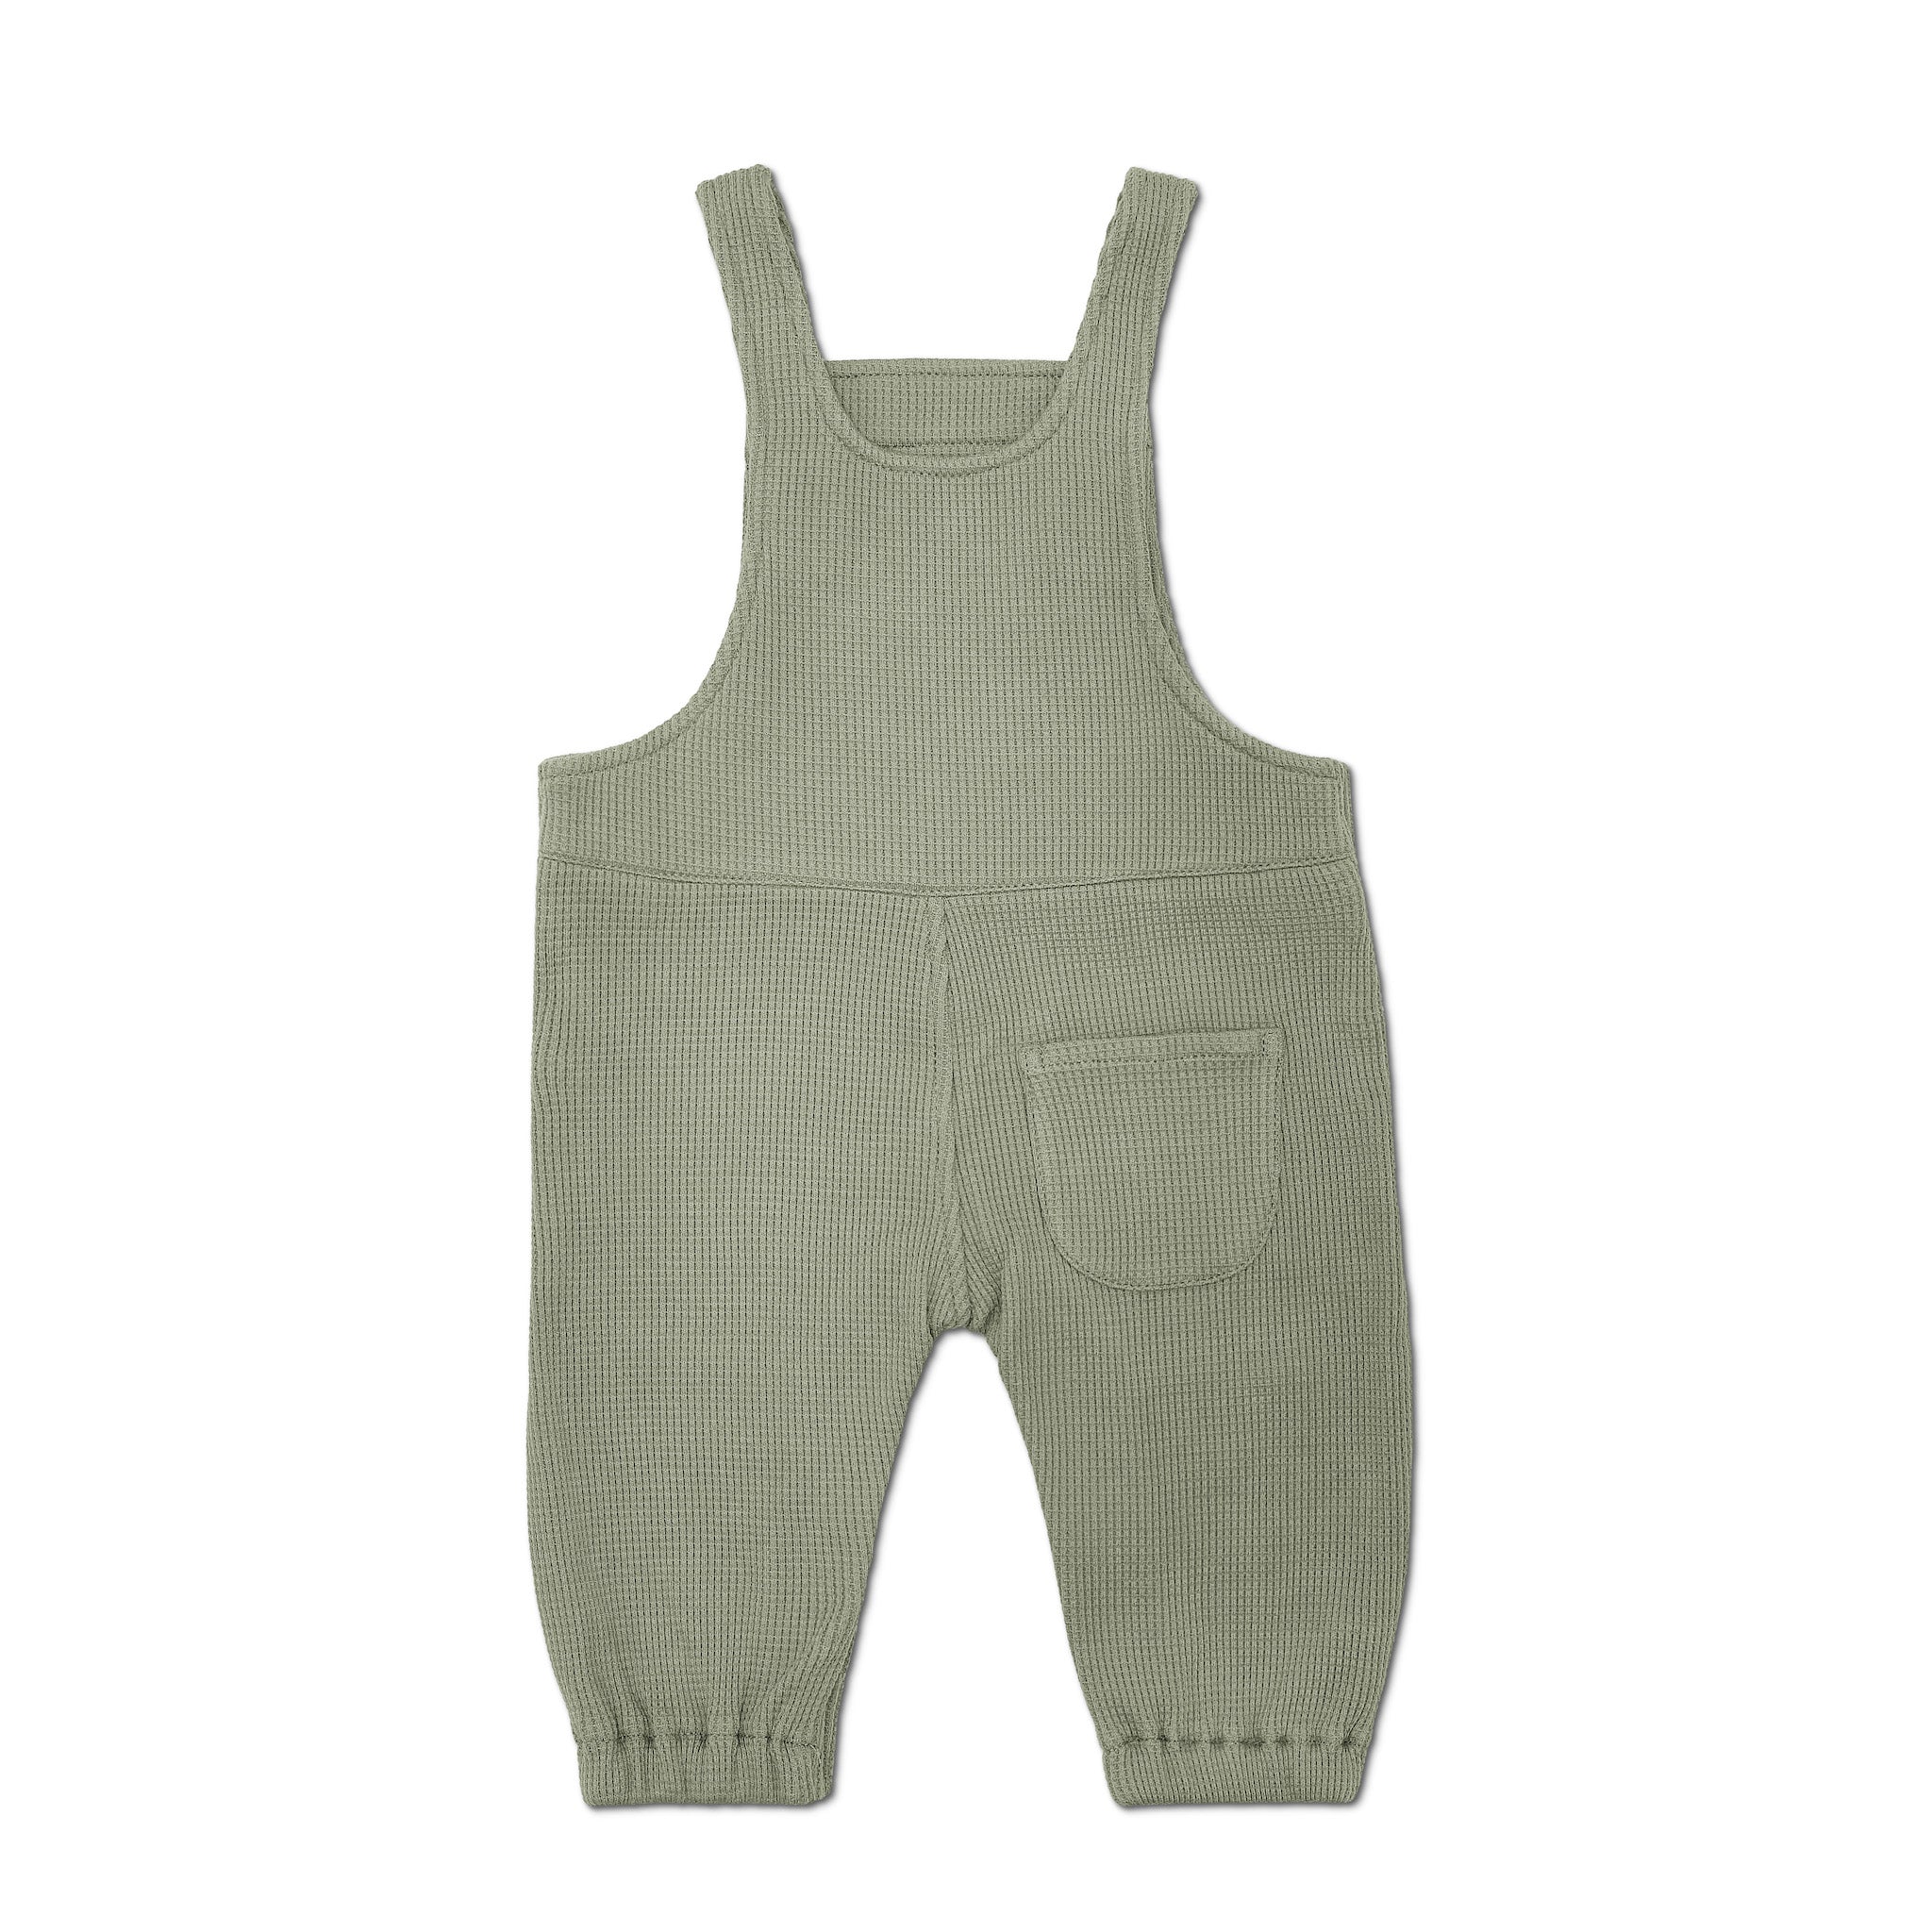 Waffle Overalls - Olive Green